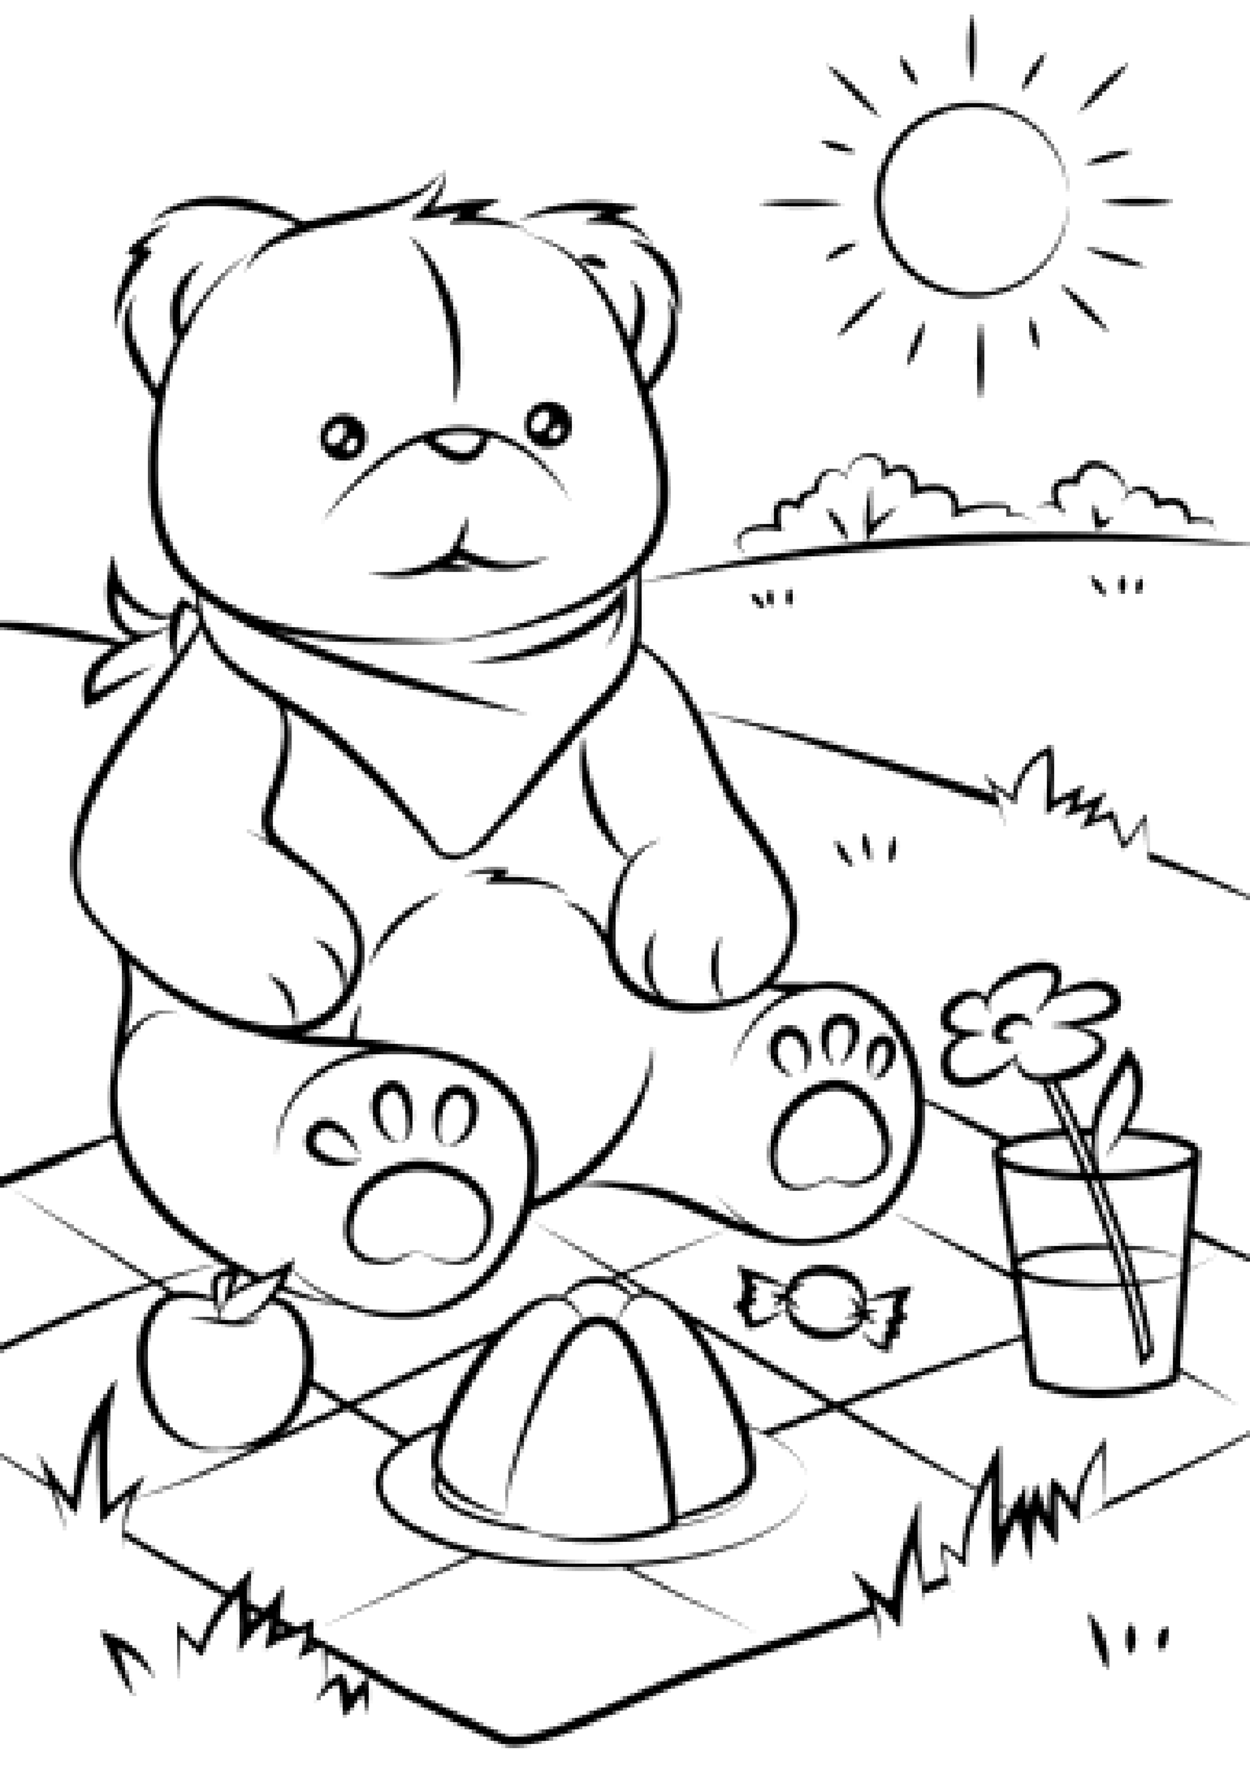 Simple Bear Coloring Book Page for Adult